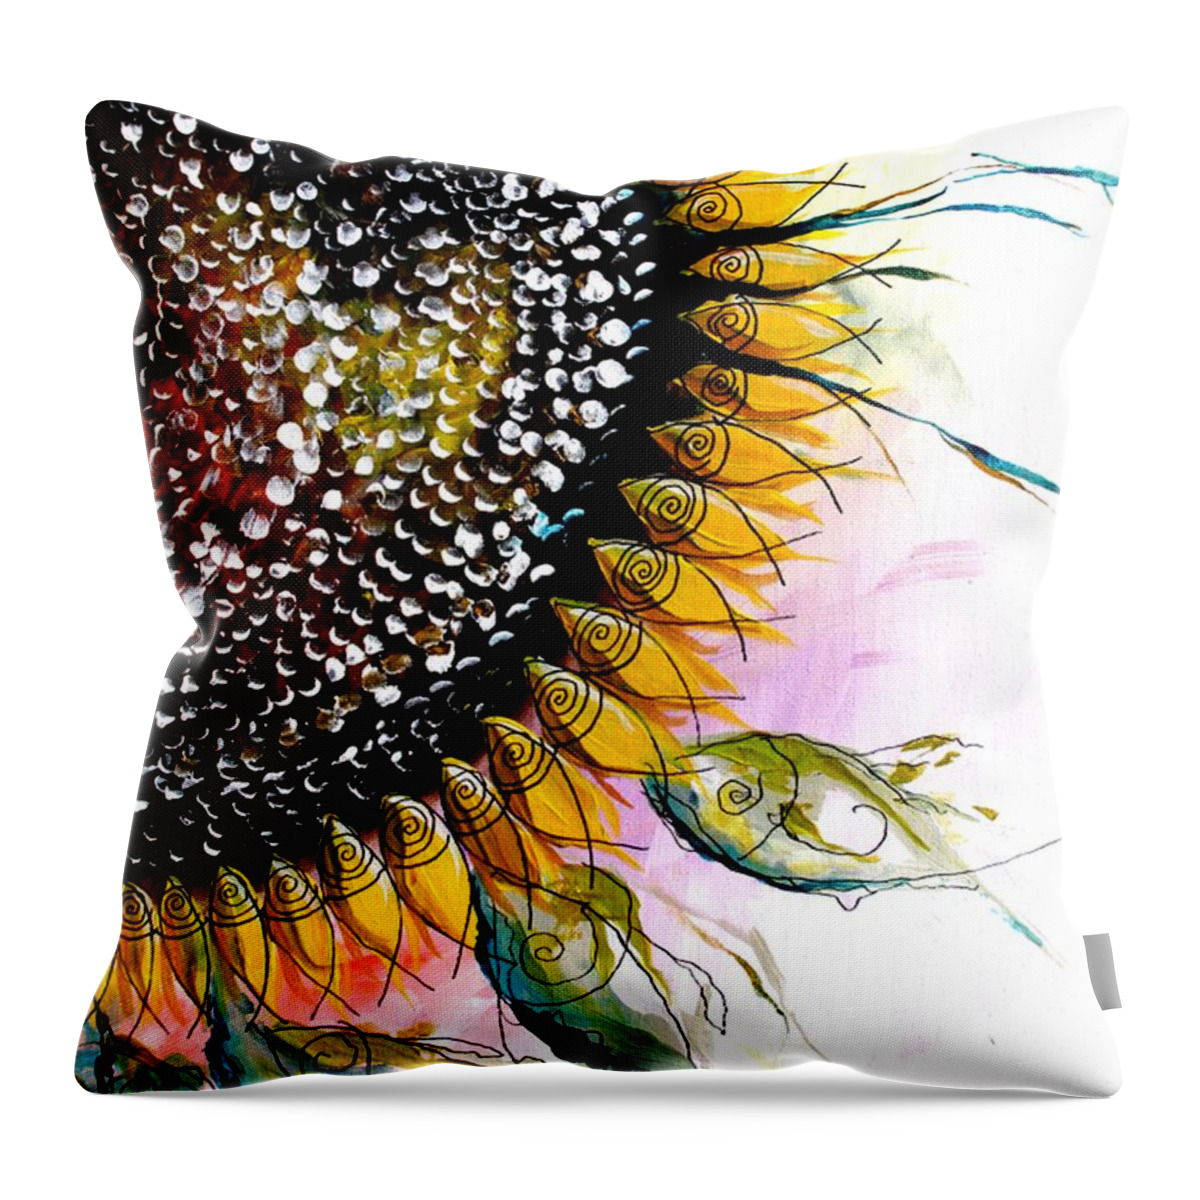 Sunflower Throw Pillow featuring the painting California Sunflower by J Vincent Scarpace